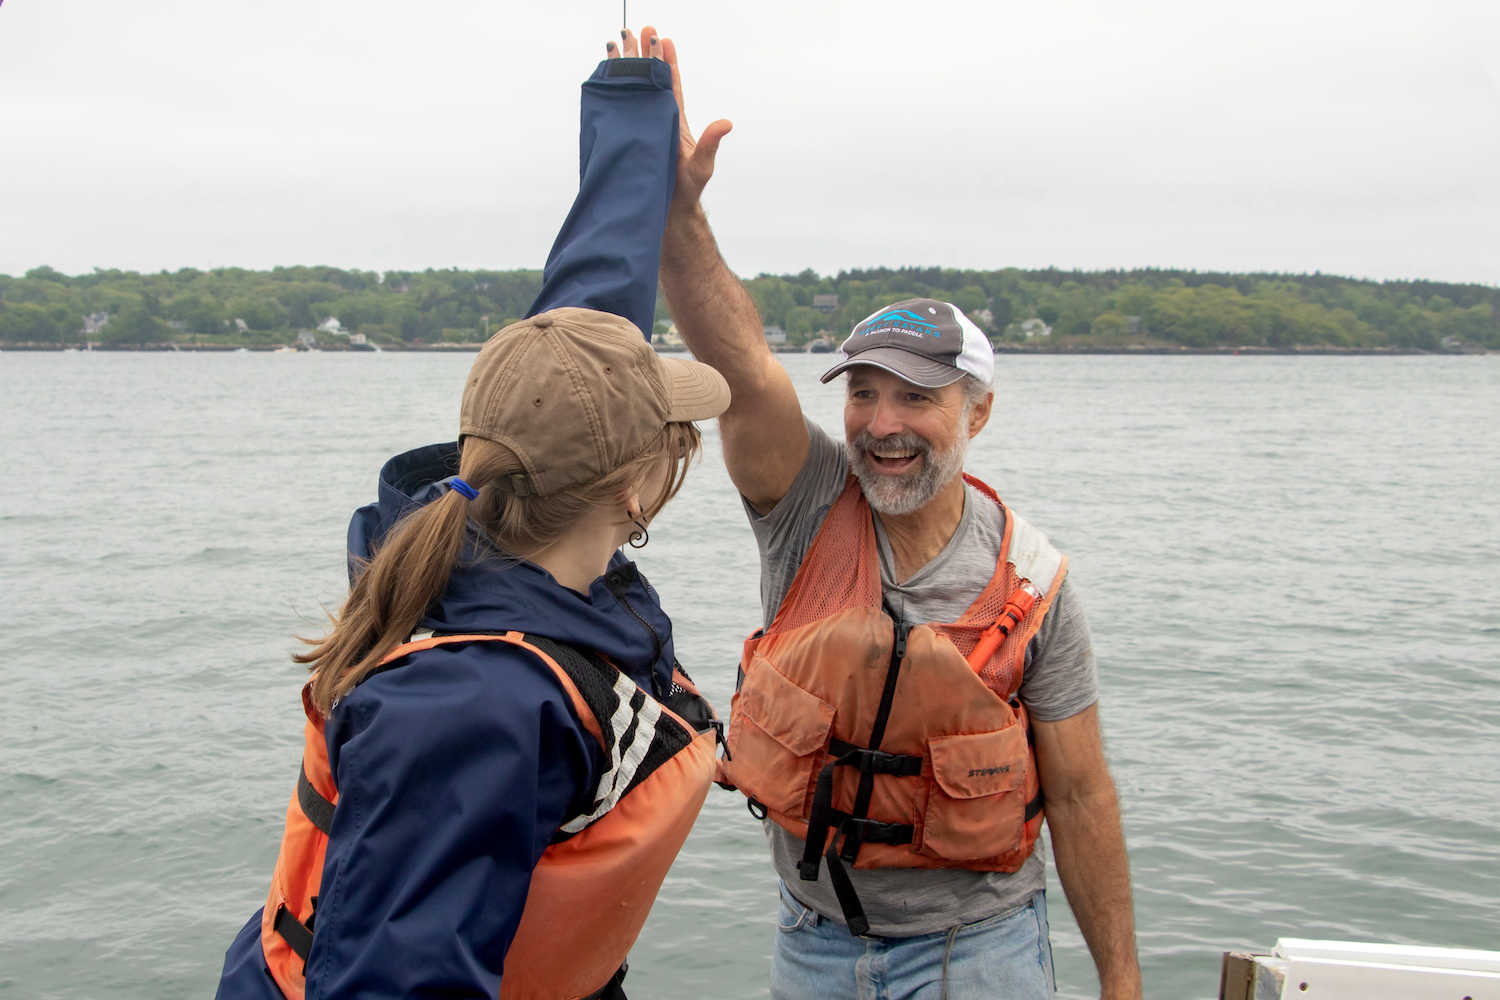 Scientist and student on boat highfive.